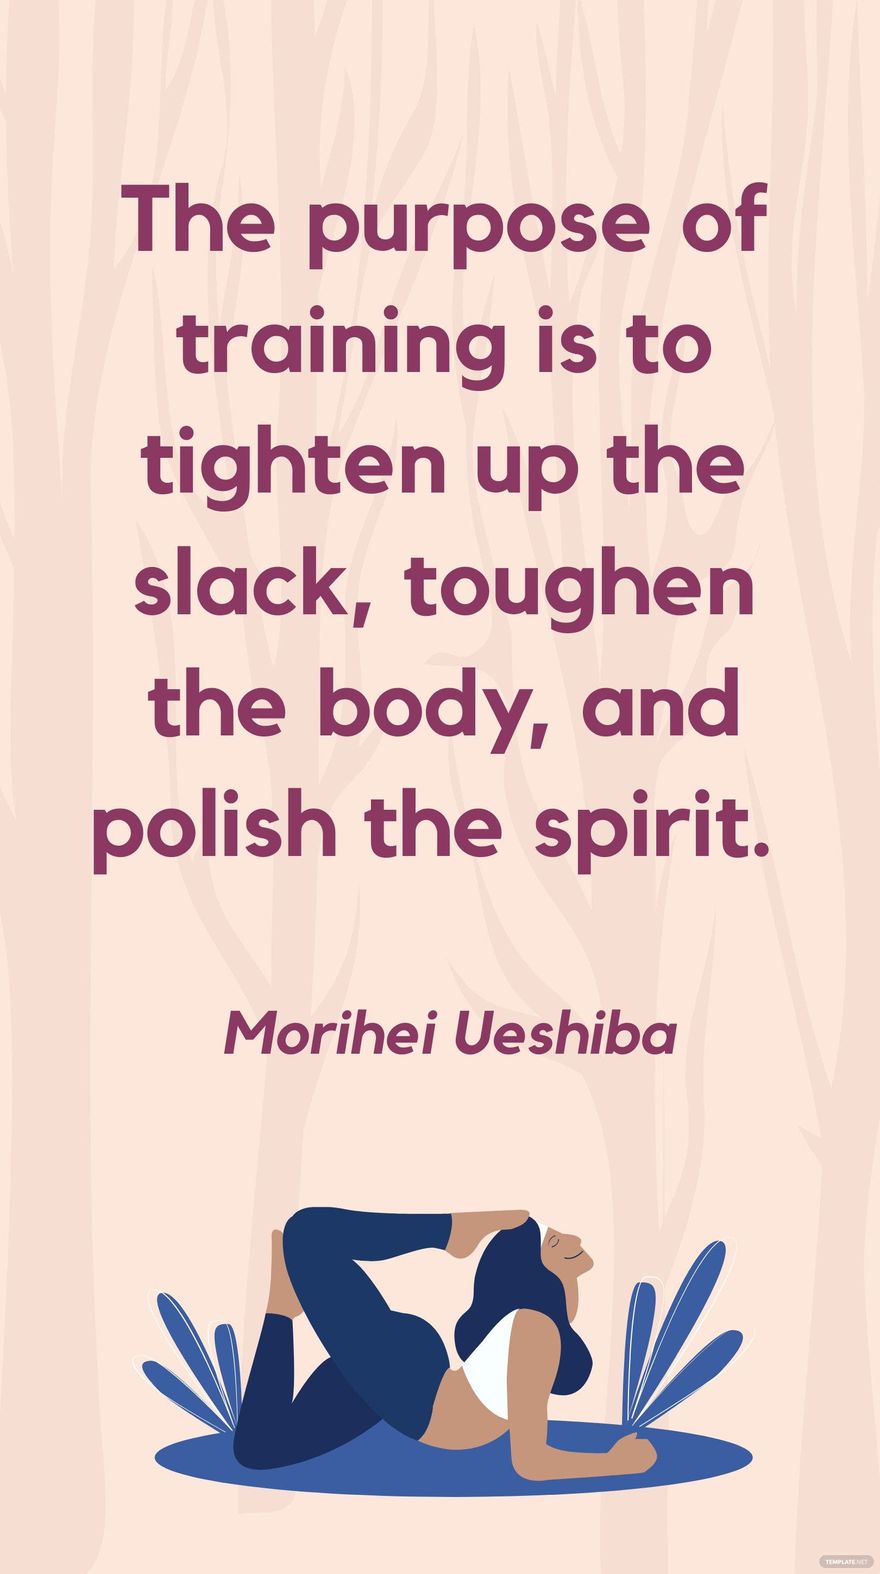 Free Morihei Ueshiba - The purpose of training is to tighten up the slack, toughen the body, and polish the spirit. in JPG